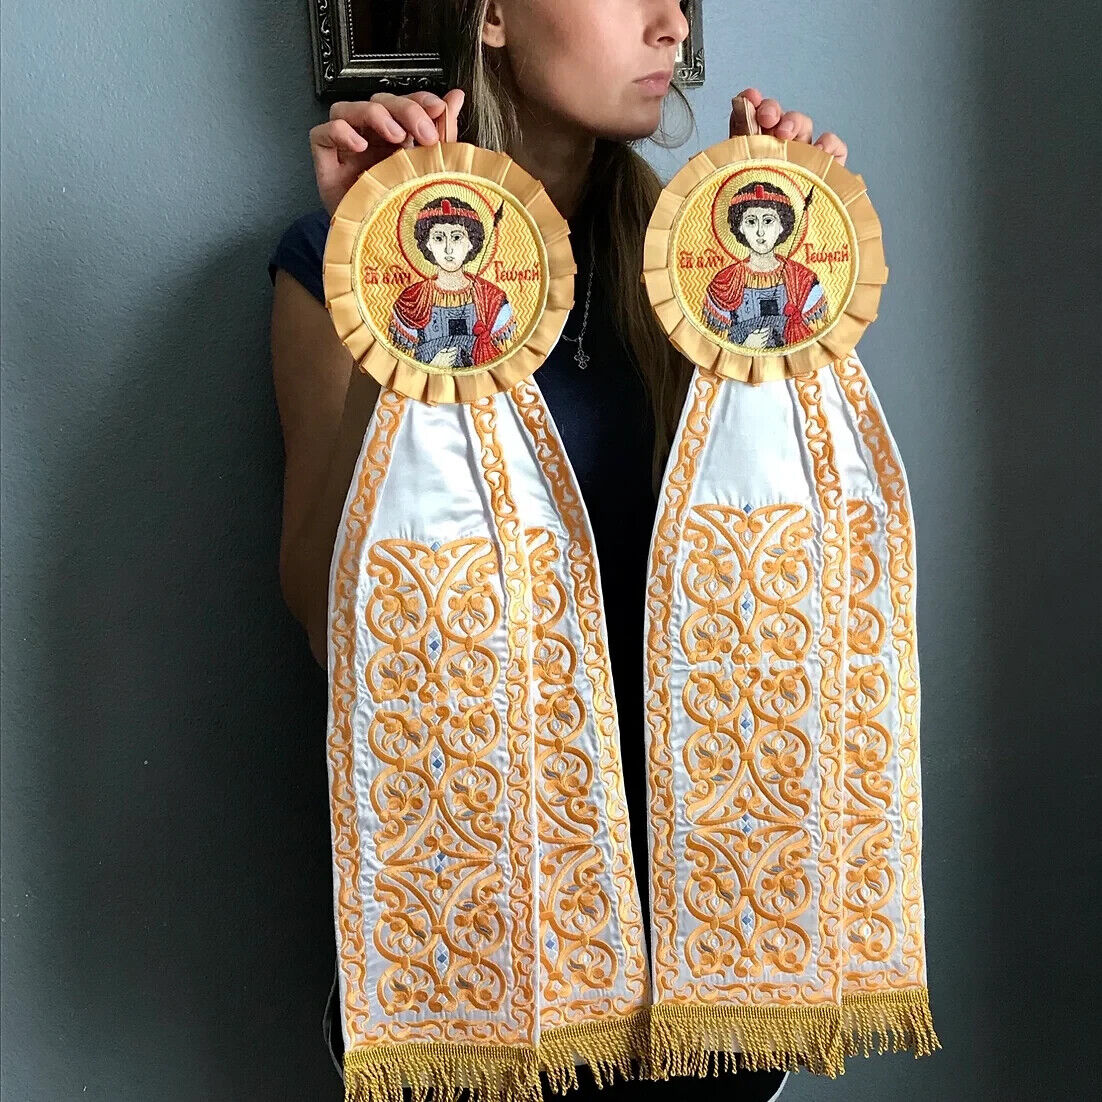 Orthodox church holy doors banners with icon of st. George